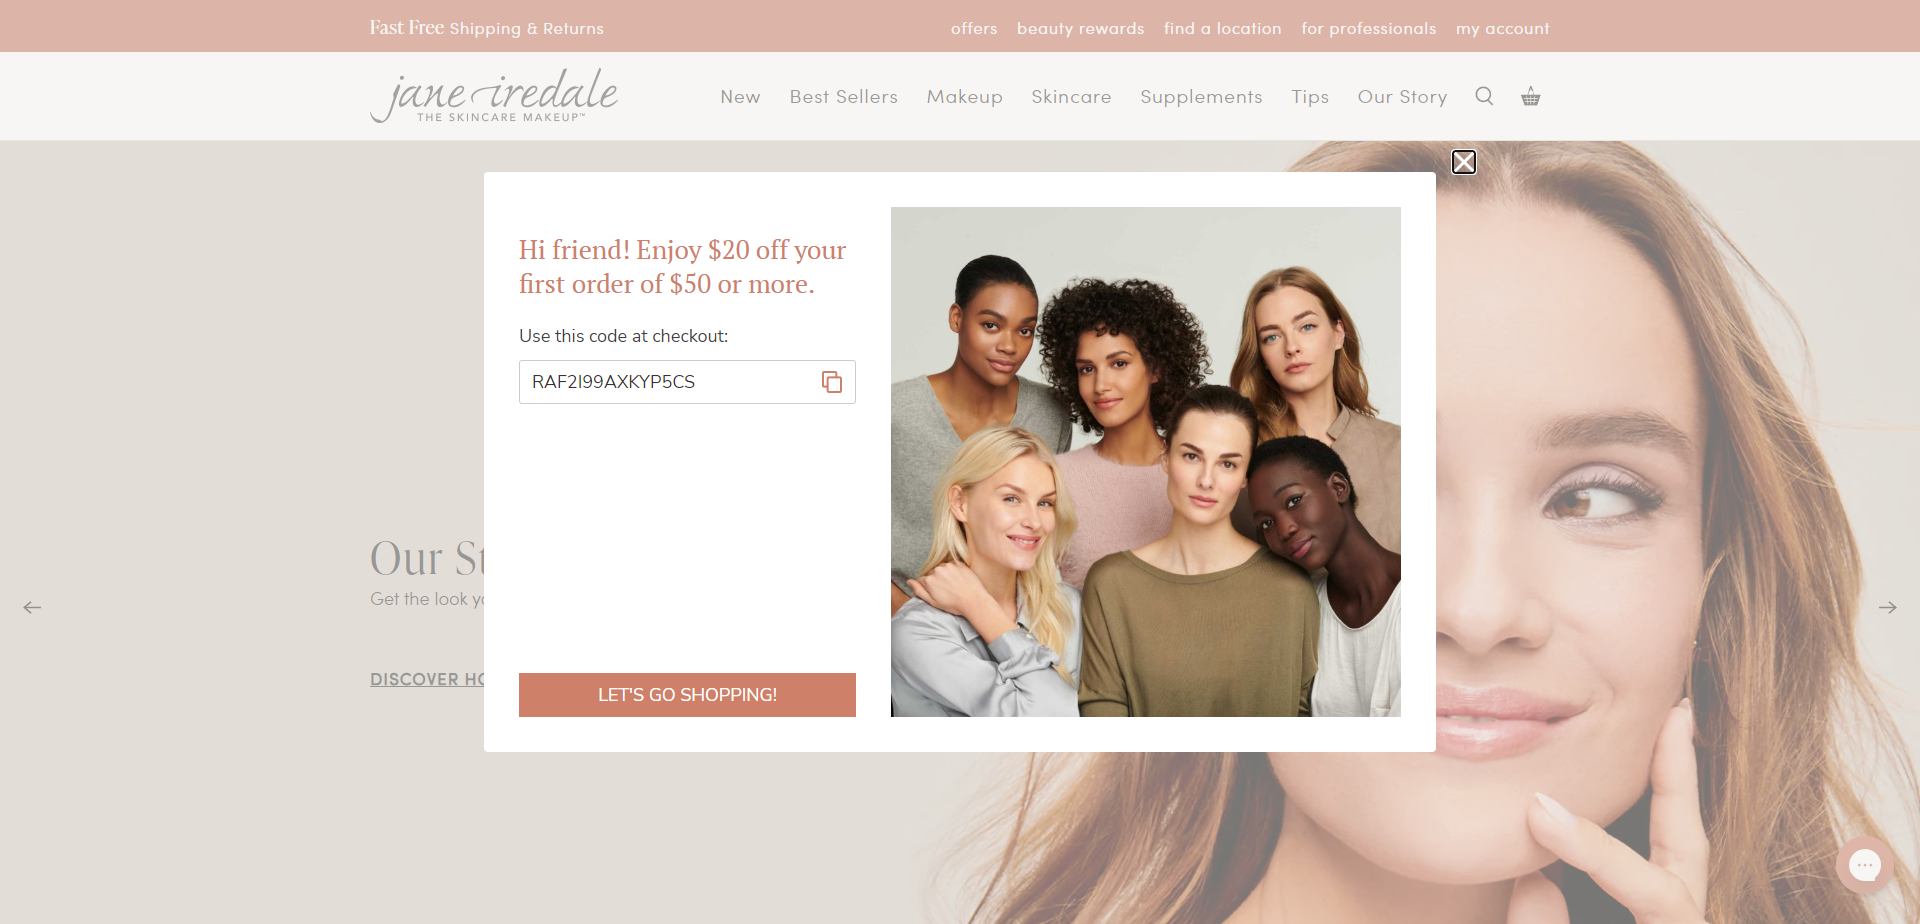 Landing Page for Jane Iredale